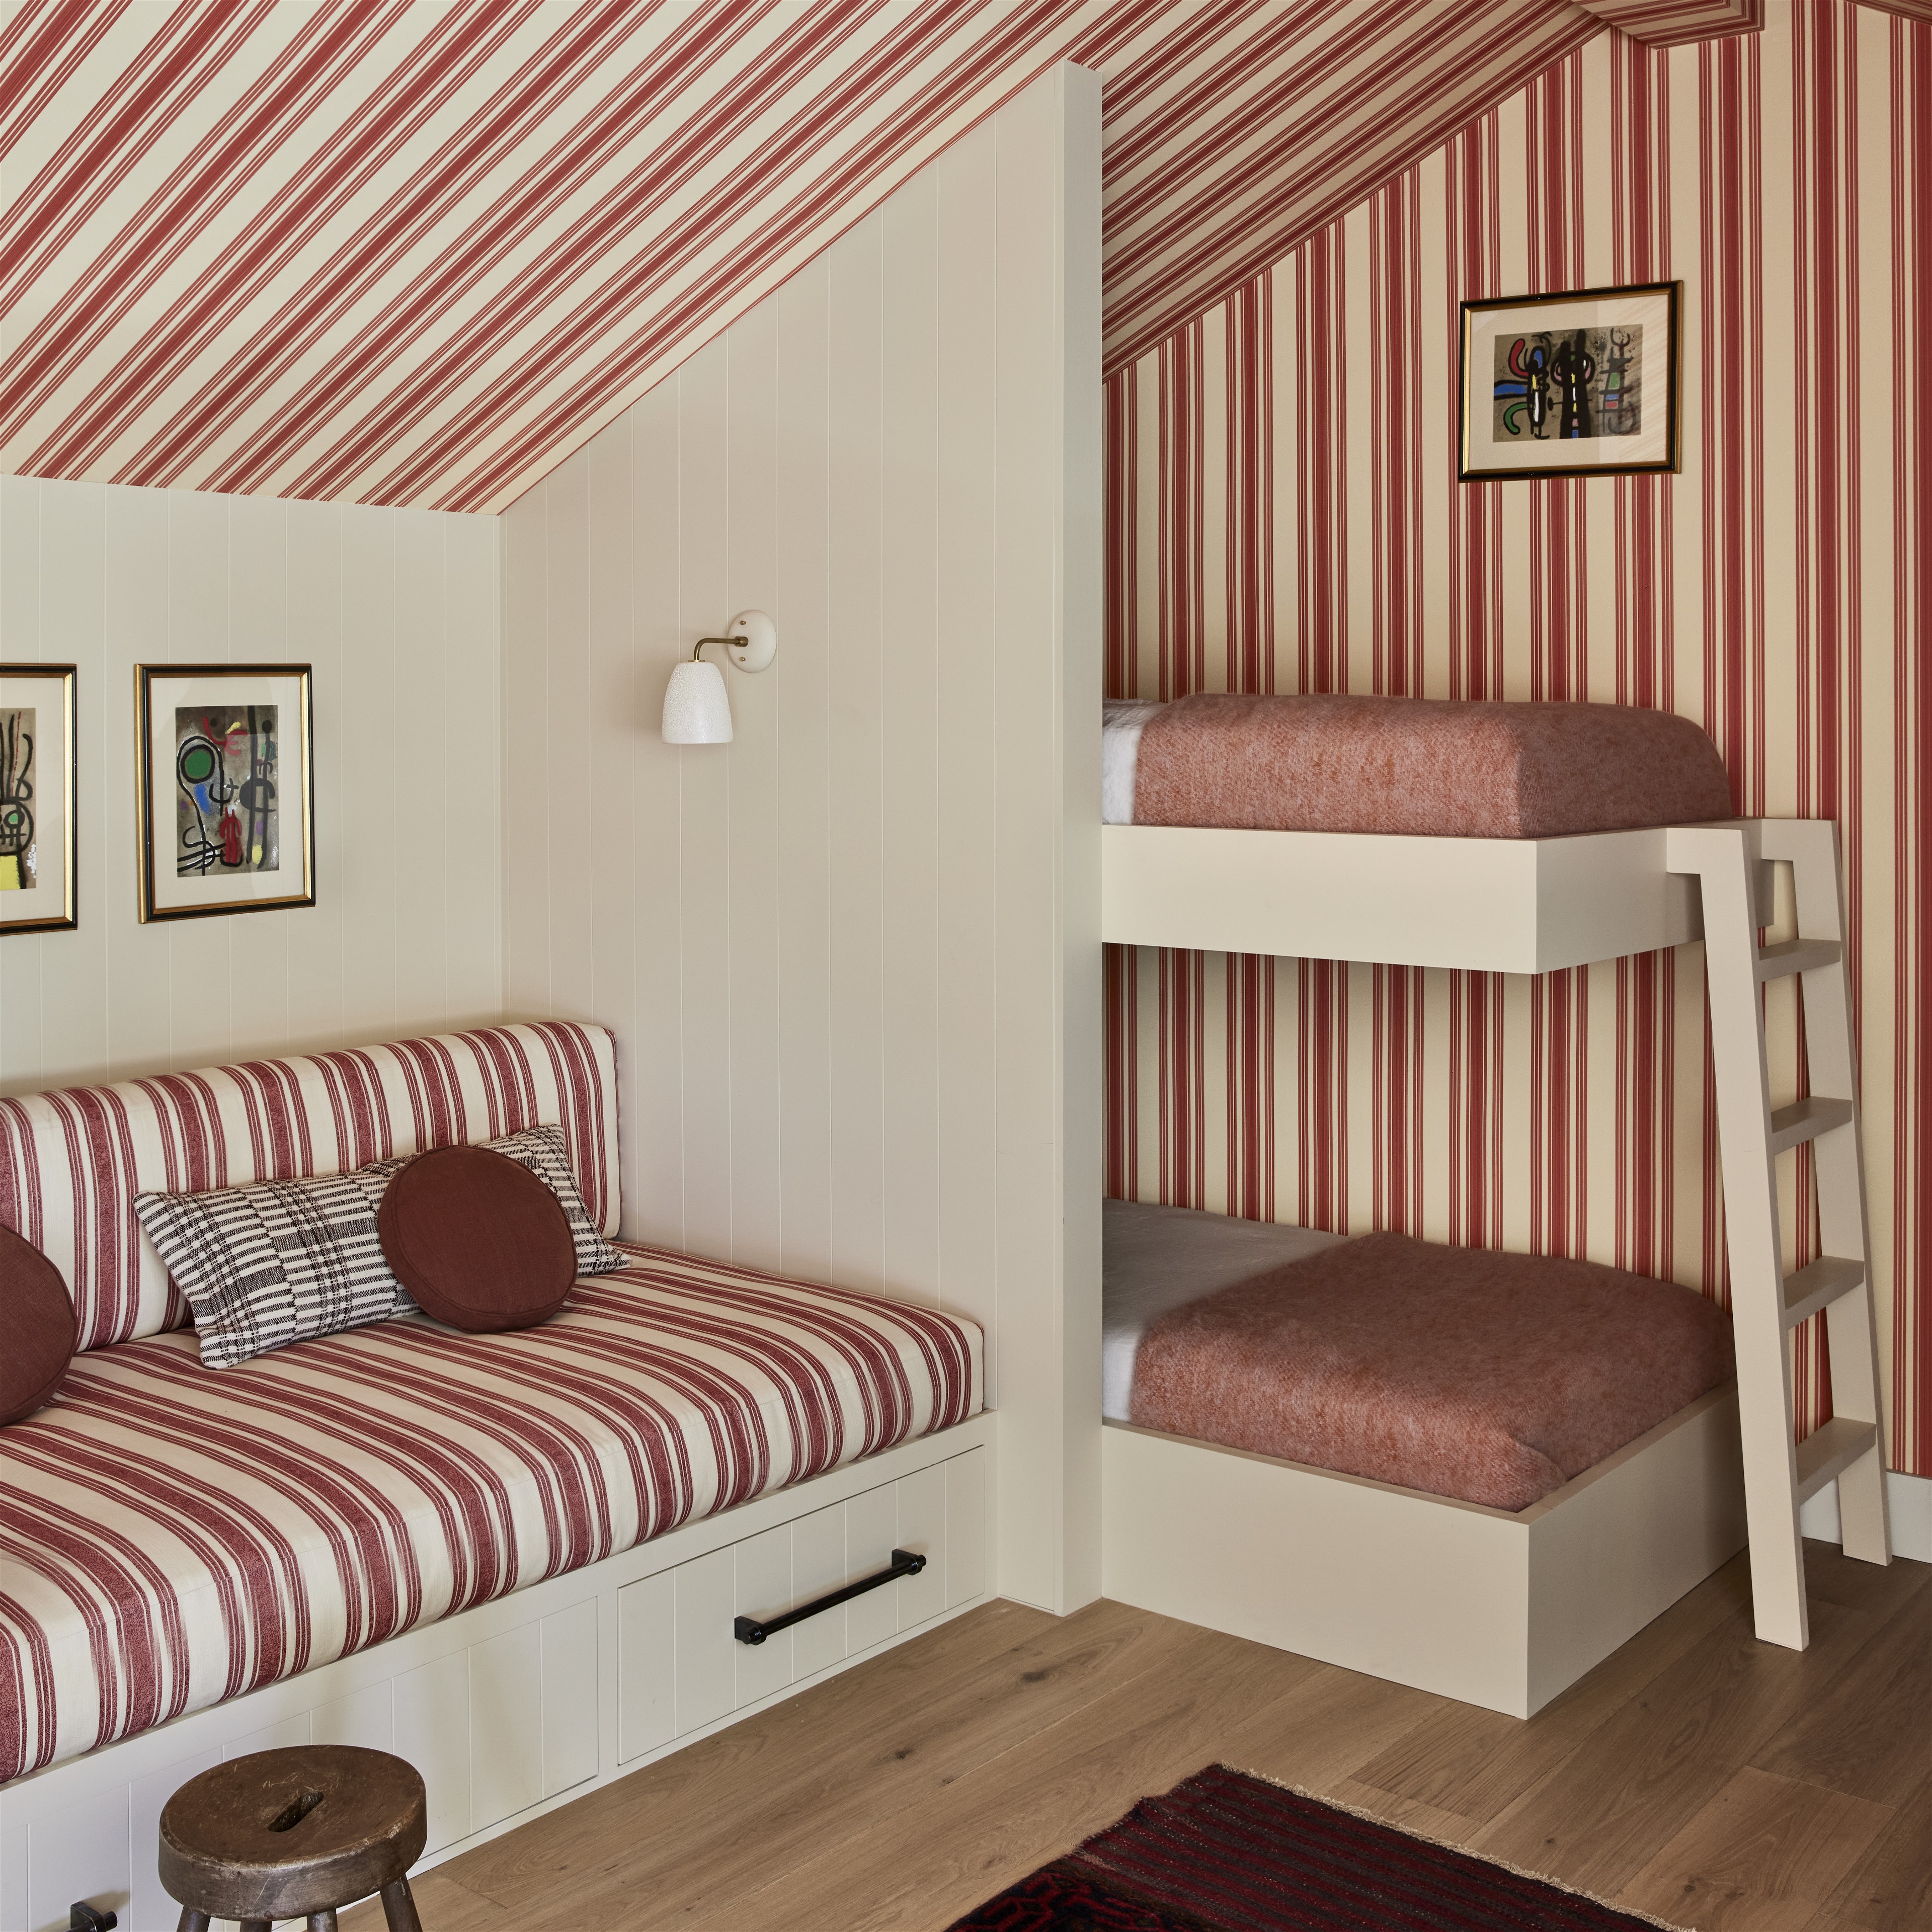 a room with a bunk bed and a striped wall